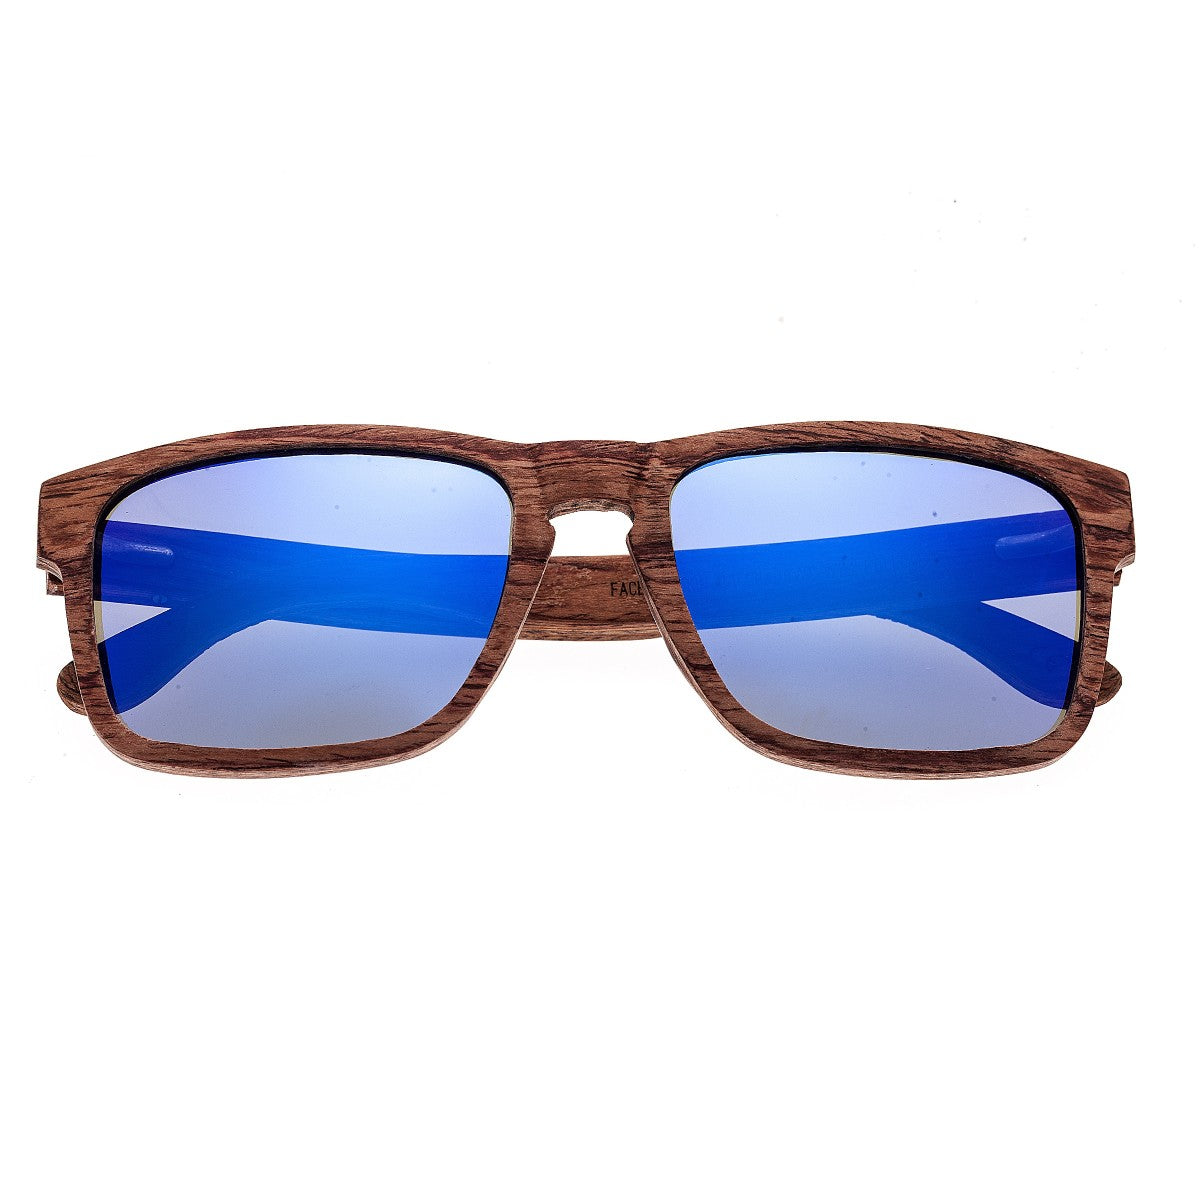 Earth Wood Whitehaven Polarized Sunglasses - Red-Rosewood/Purple - ESG080R